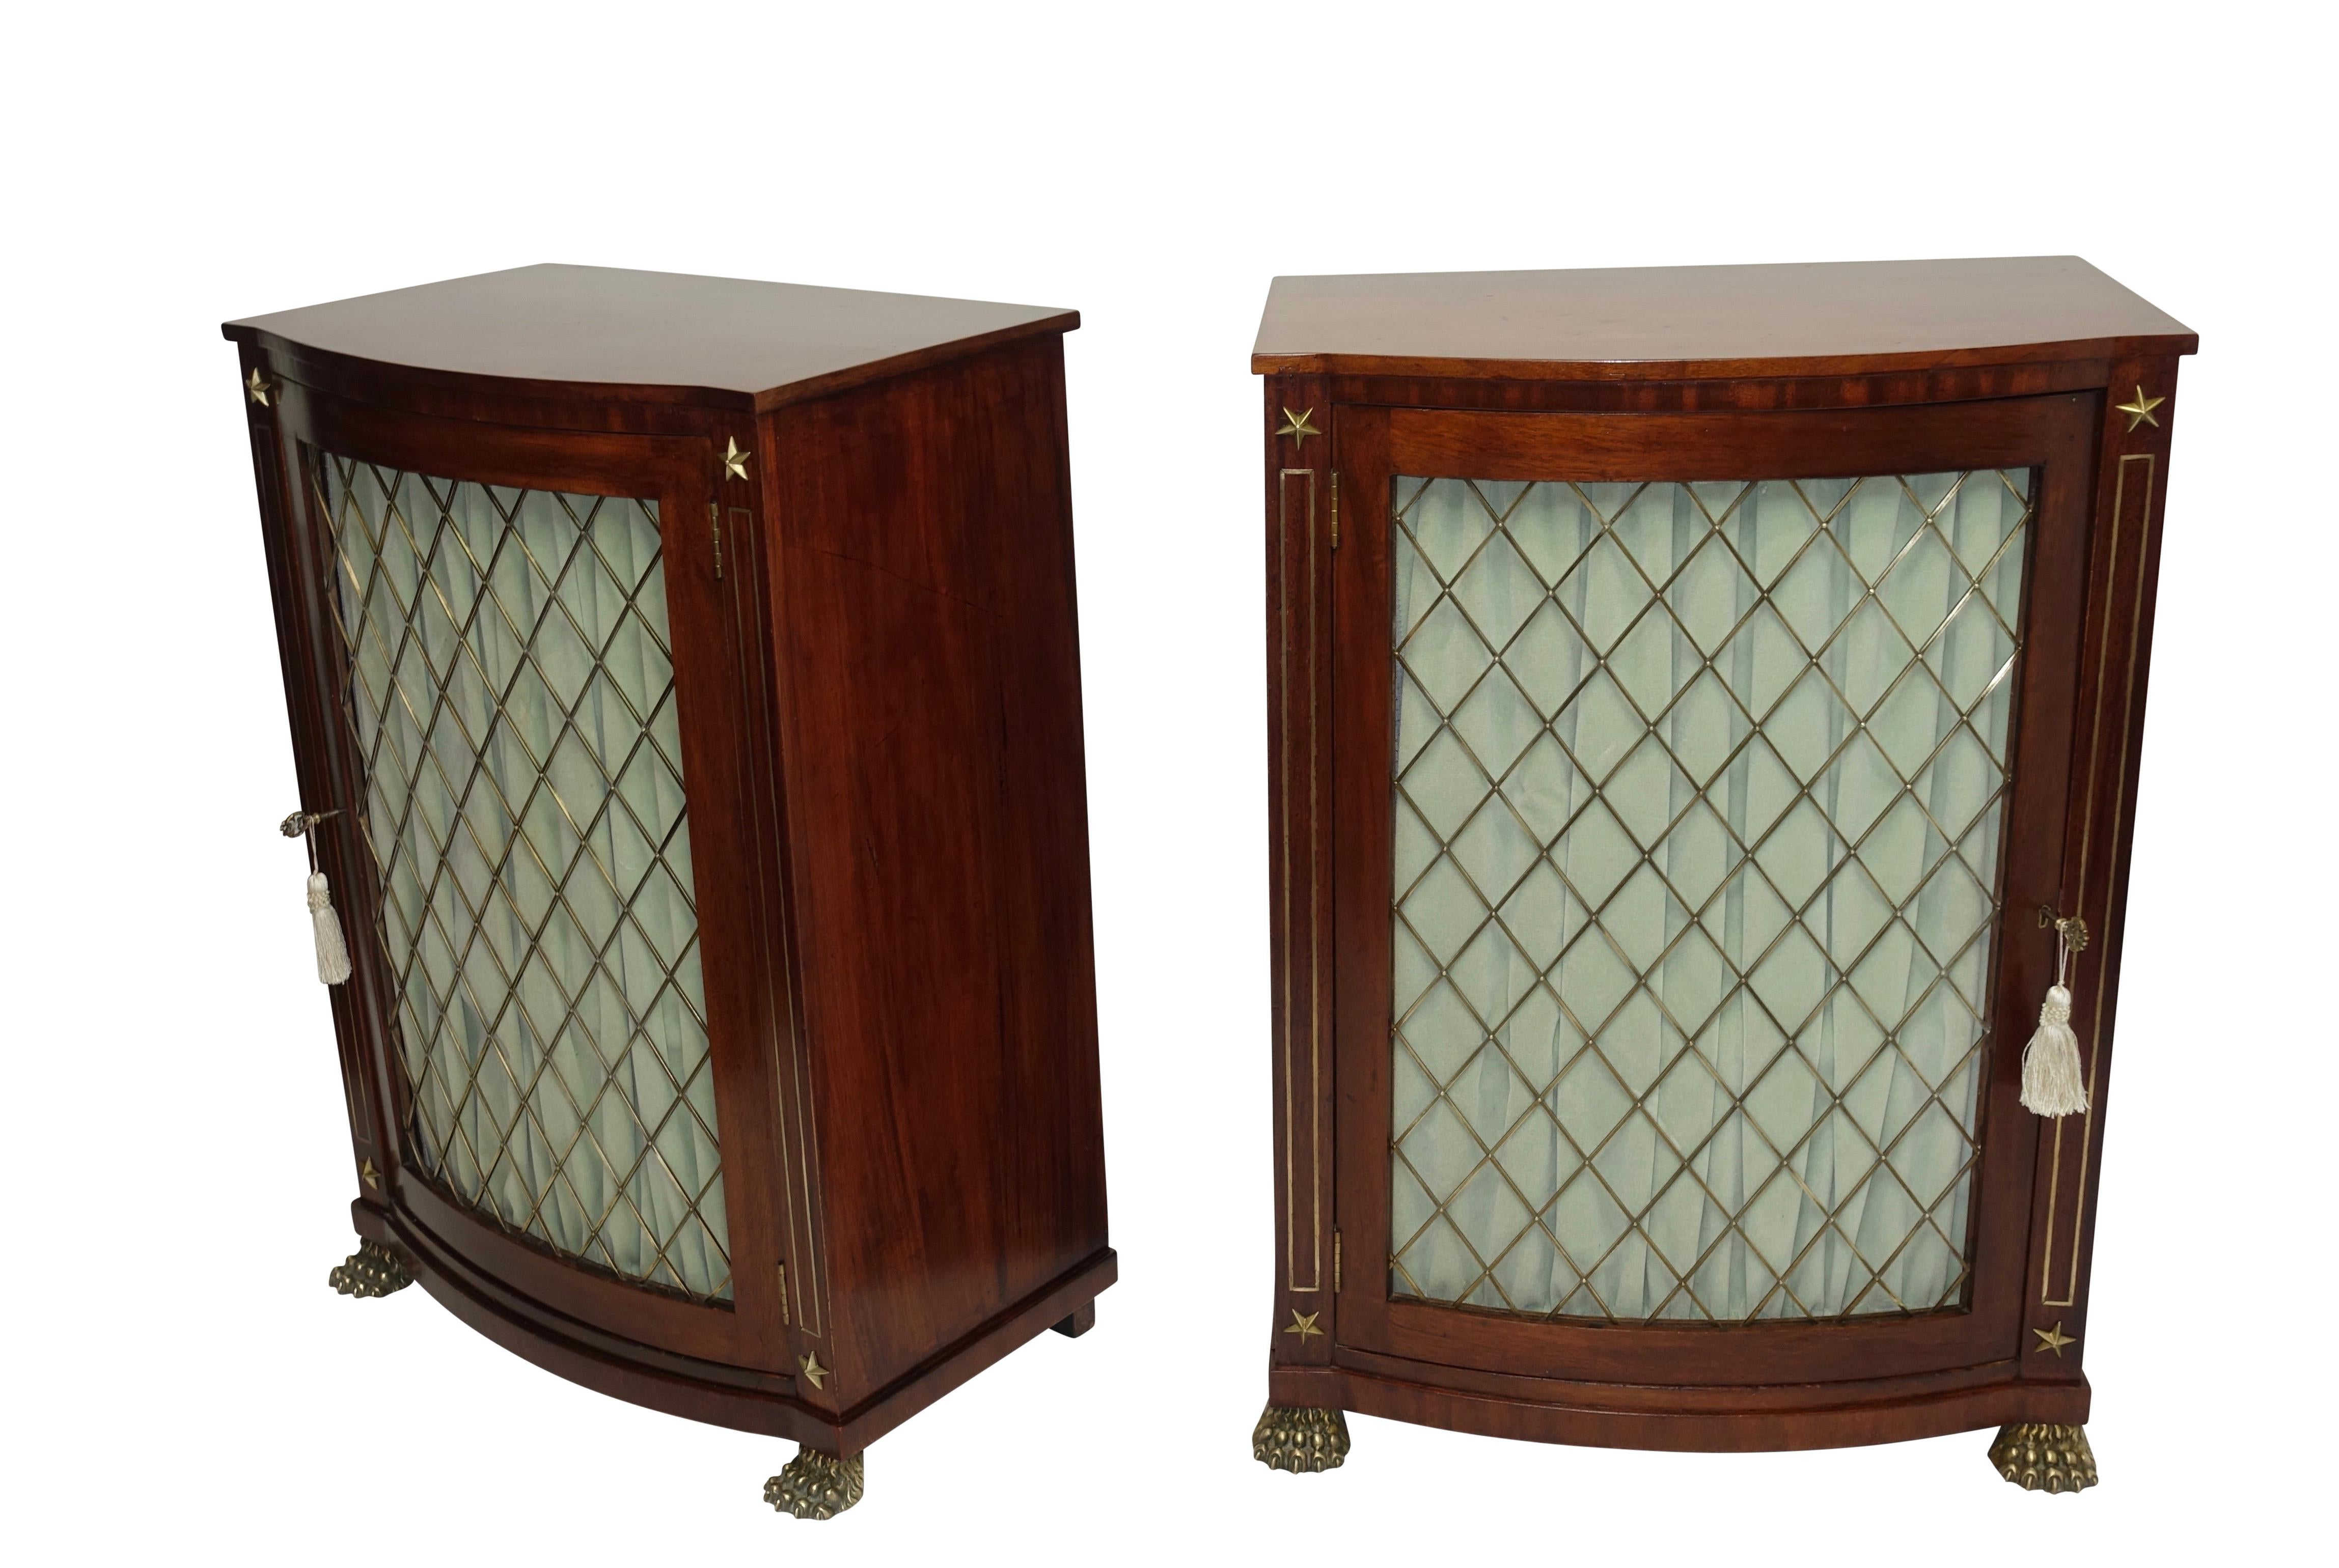 An exceptional matched pair of mahogany Regency period bow front library side cabinets with brass mounts and inlay, applied star decorations, and having original bronze screens. Each cabinet having a single interior shelf. Originally screen was